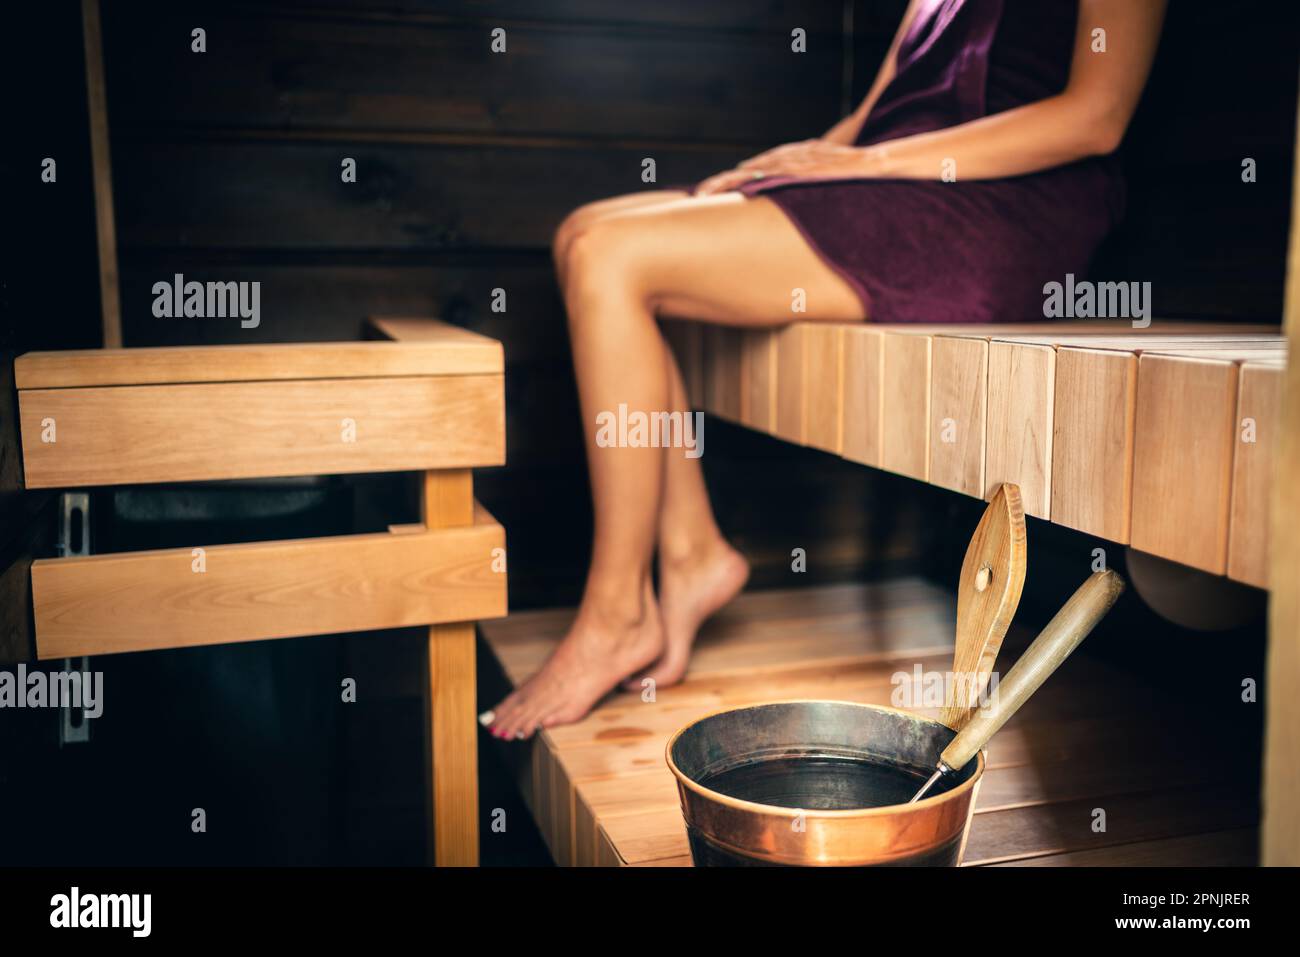 Woman in sauna in Finland. Wood steam room at summer cabin, home or hotel. Water bucket and ladle. Spa detox and healthy wellness treatment for body. Stock Photo